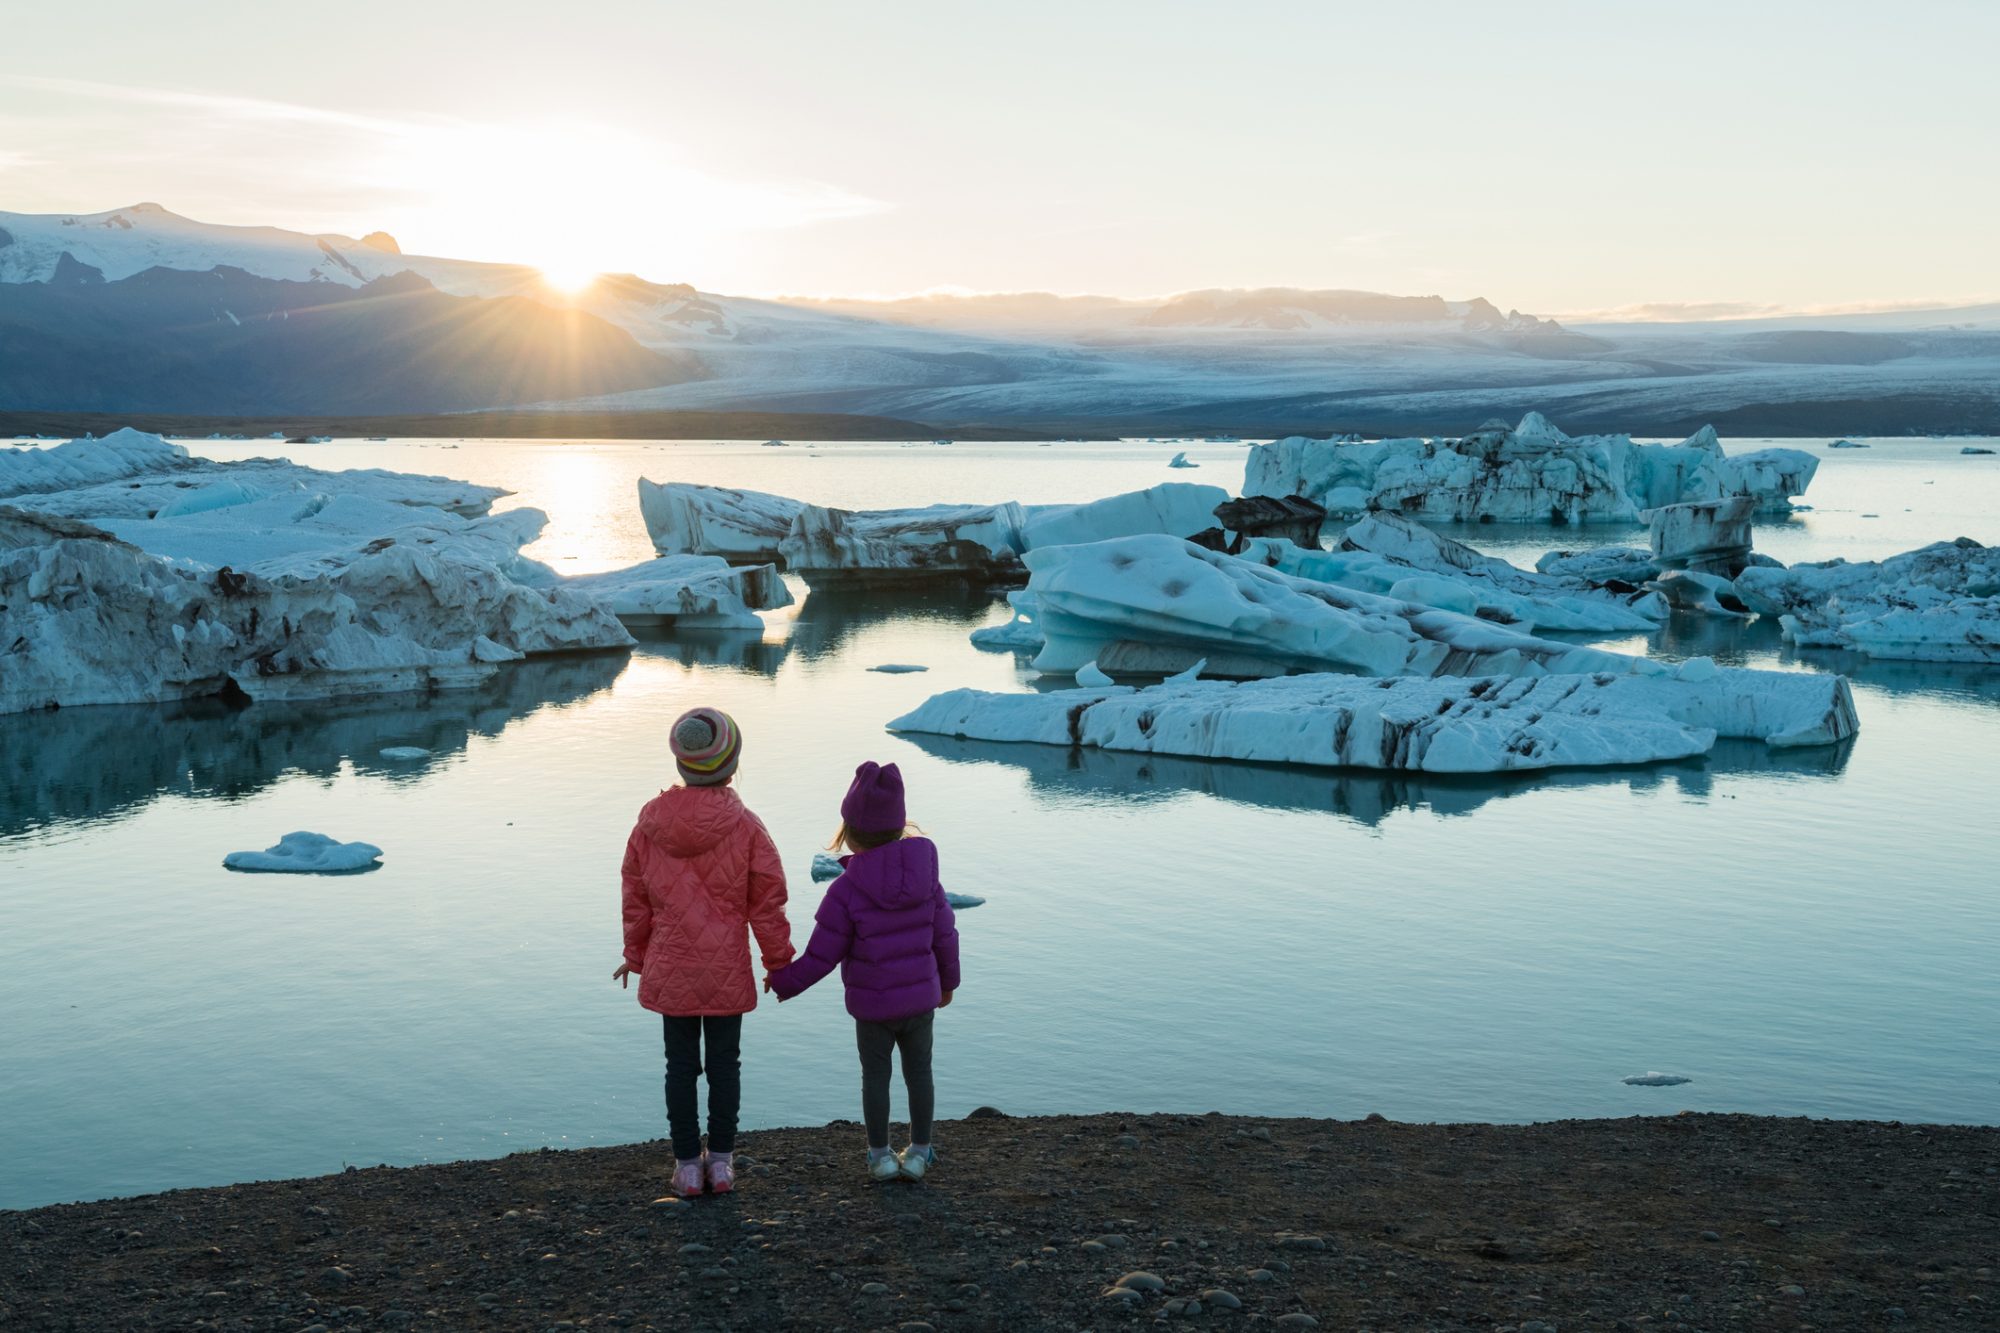 An image of children in Iceland.